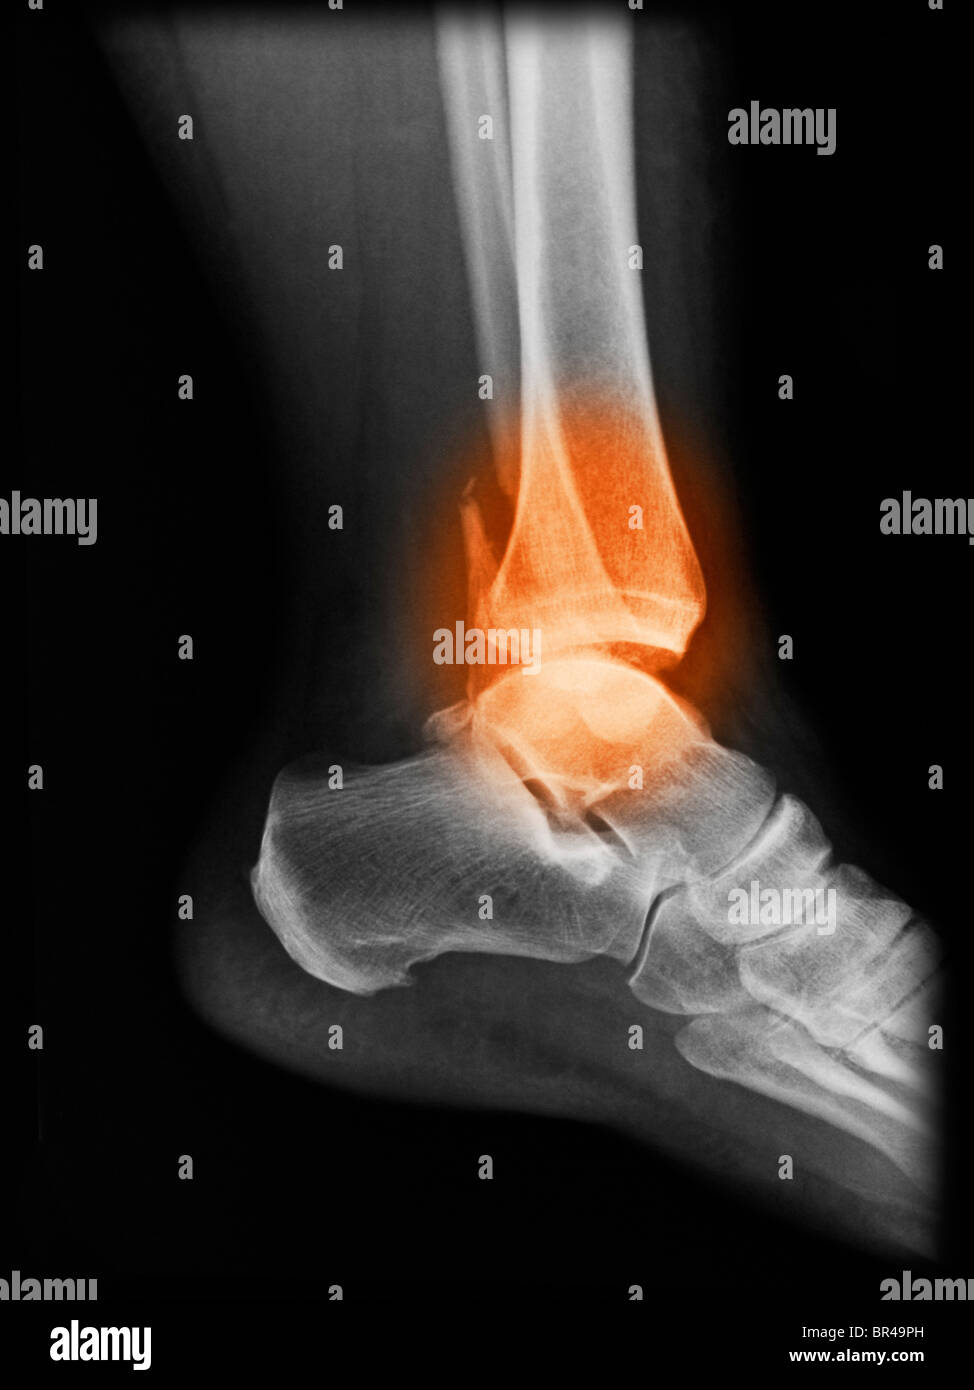 X-ray showing a bimalleolar ankle fracture in a 50 year old woman Stock Photo